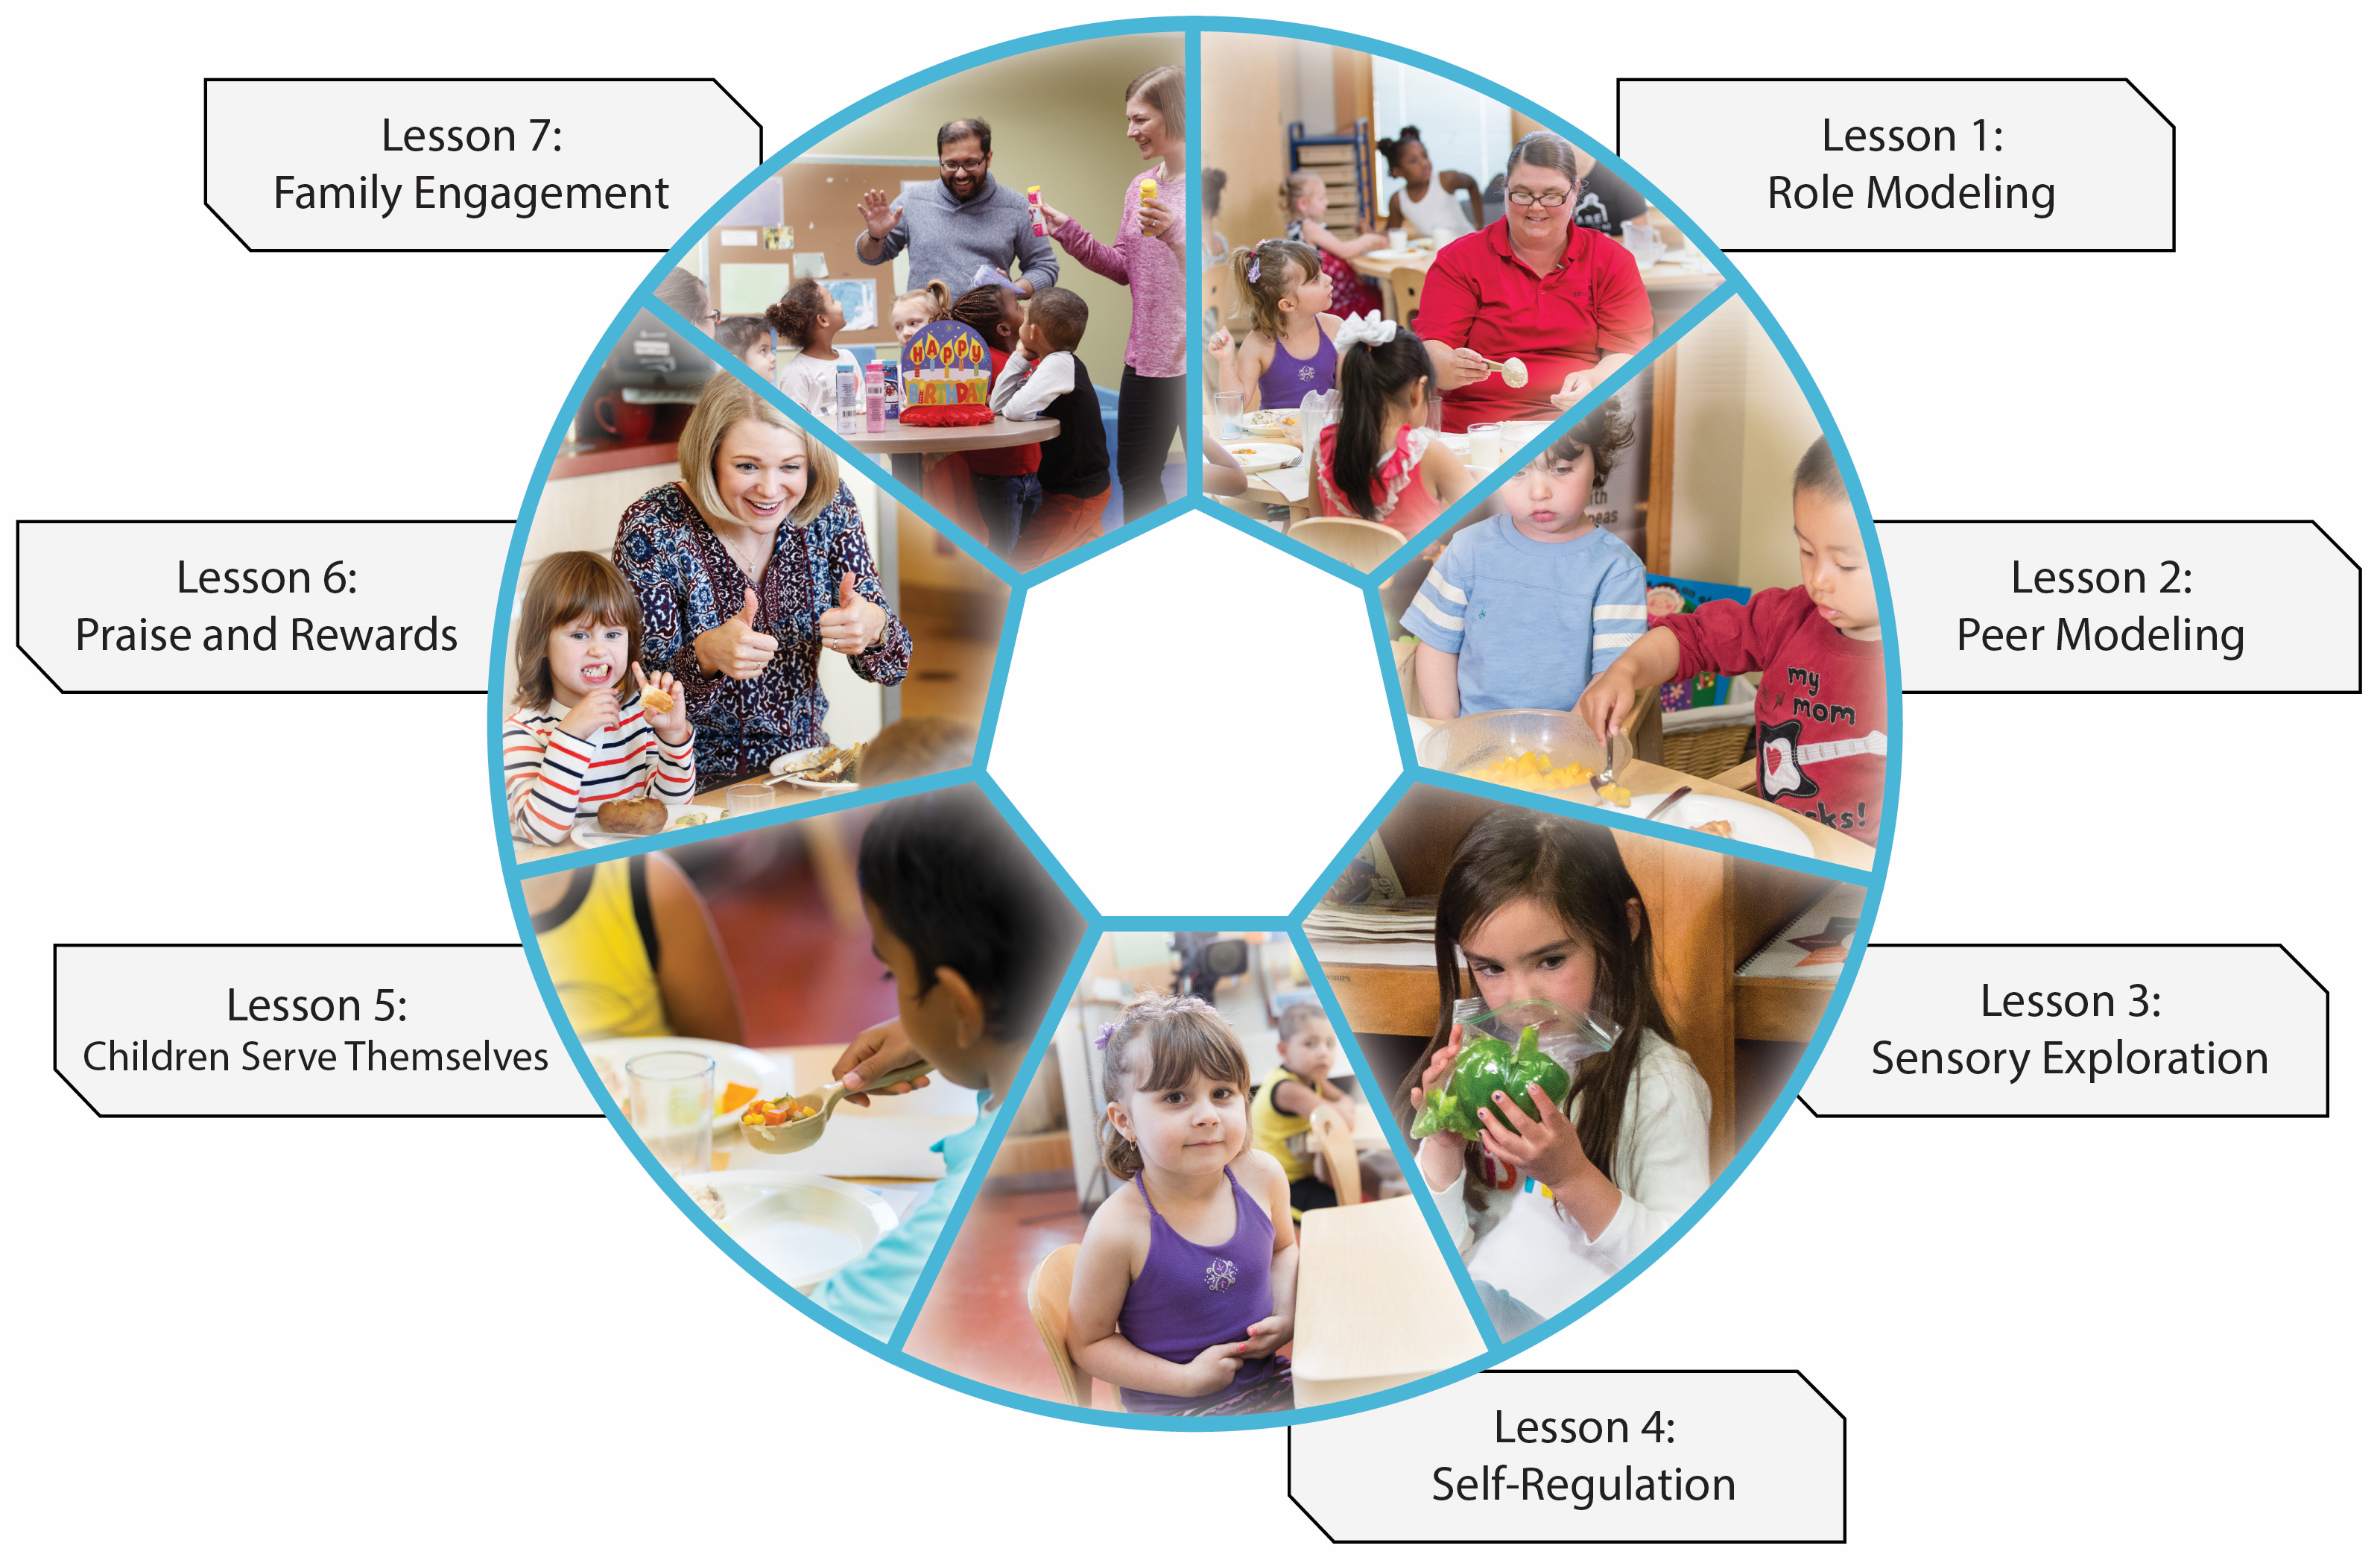 EAT Practice Wheel with the 7 lessons listed with images for each